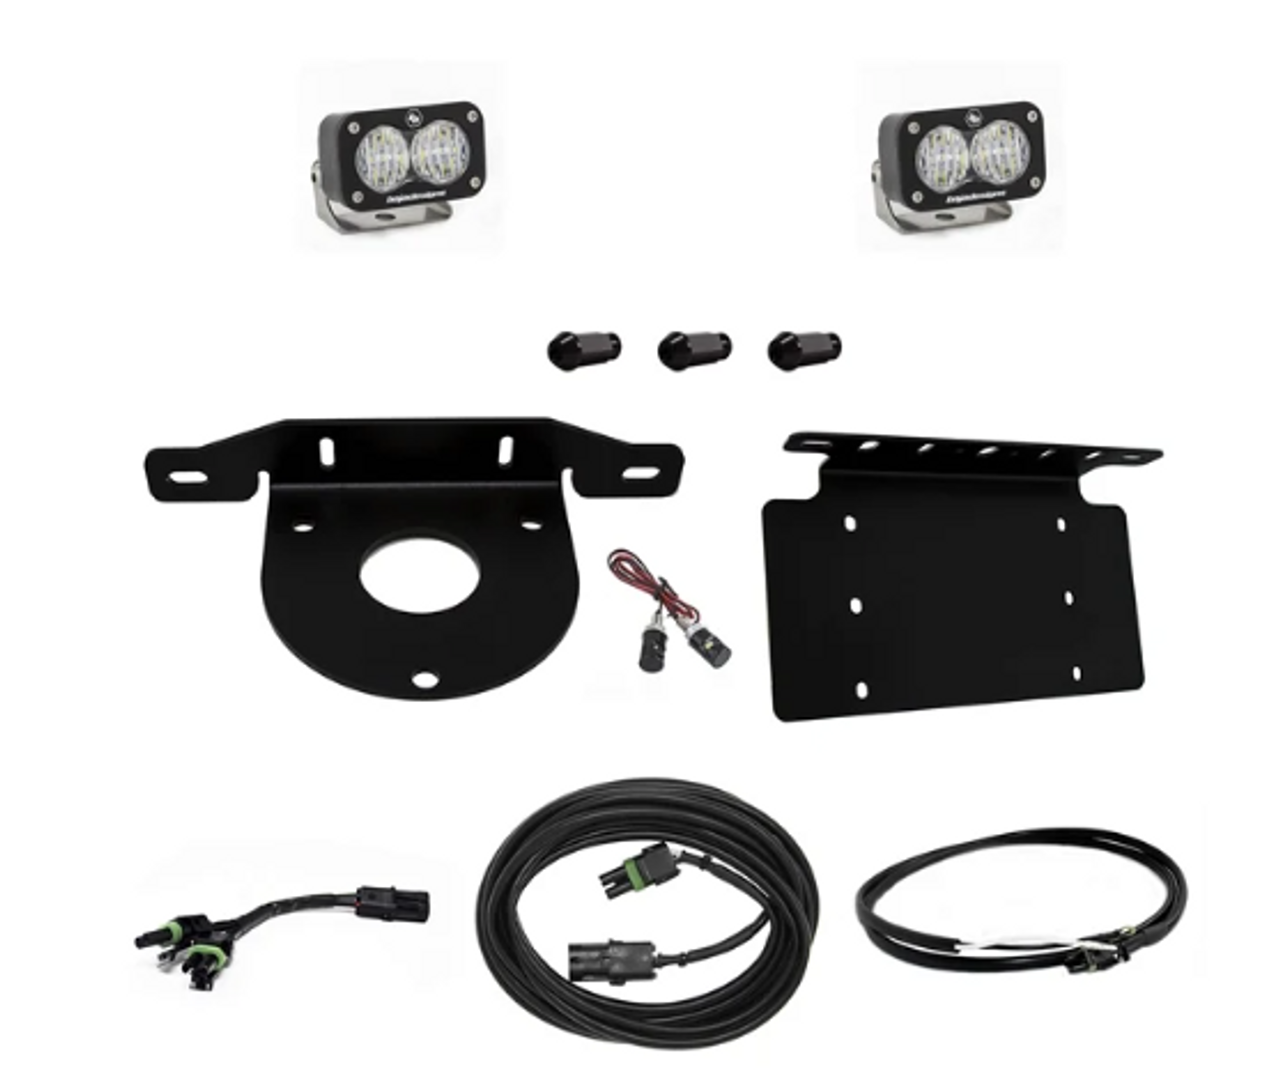 Baja Designs 447764 Dual S2 Series Sport W/C Reverse Kit & License Plate Mount for Ford Bronco 2021+